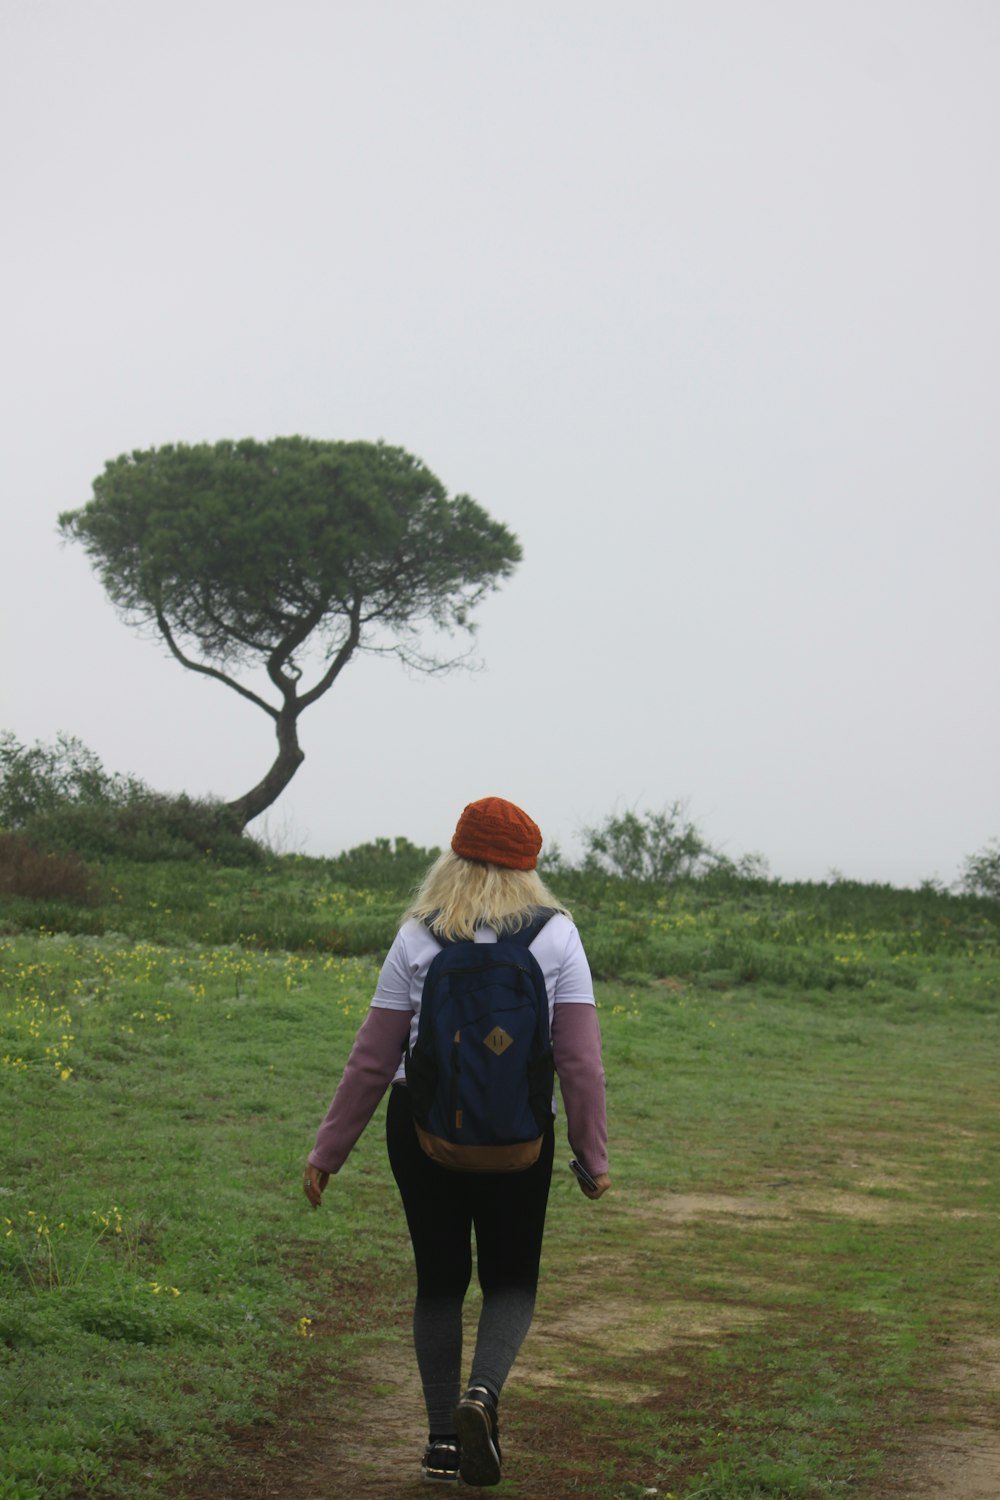 a woman walking down a dirt road with a tree in the background